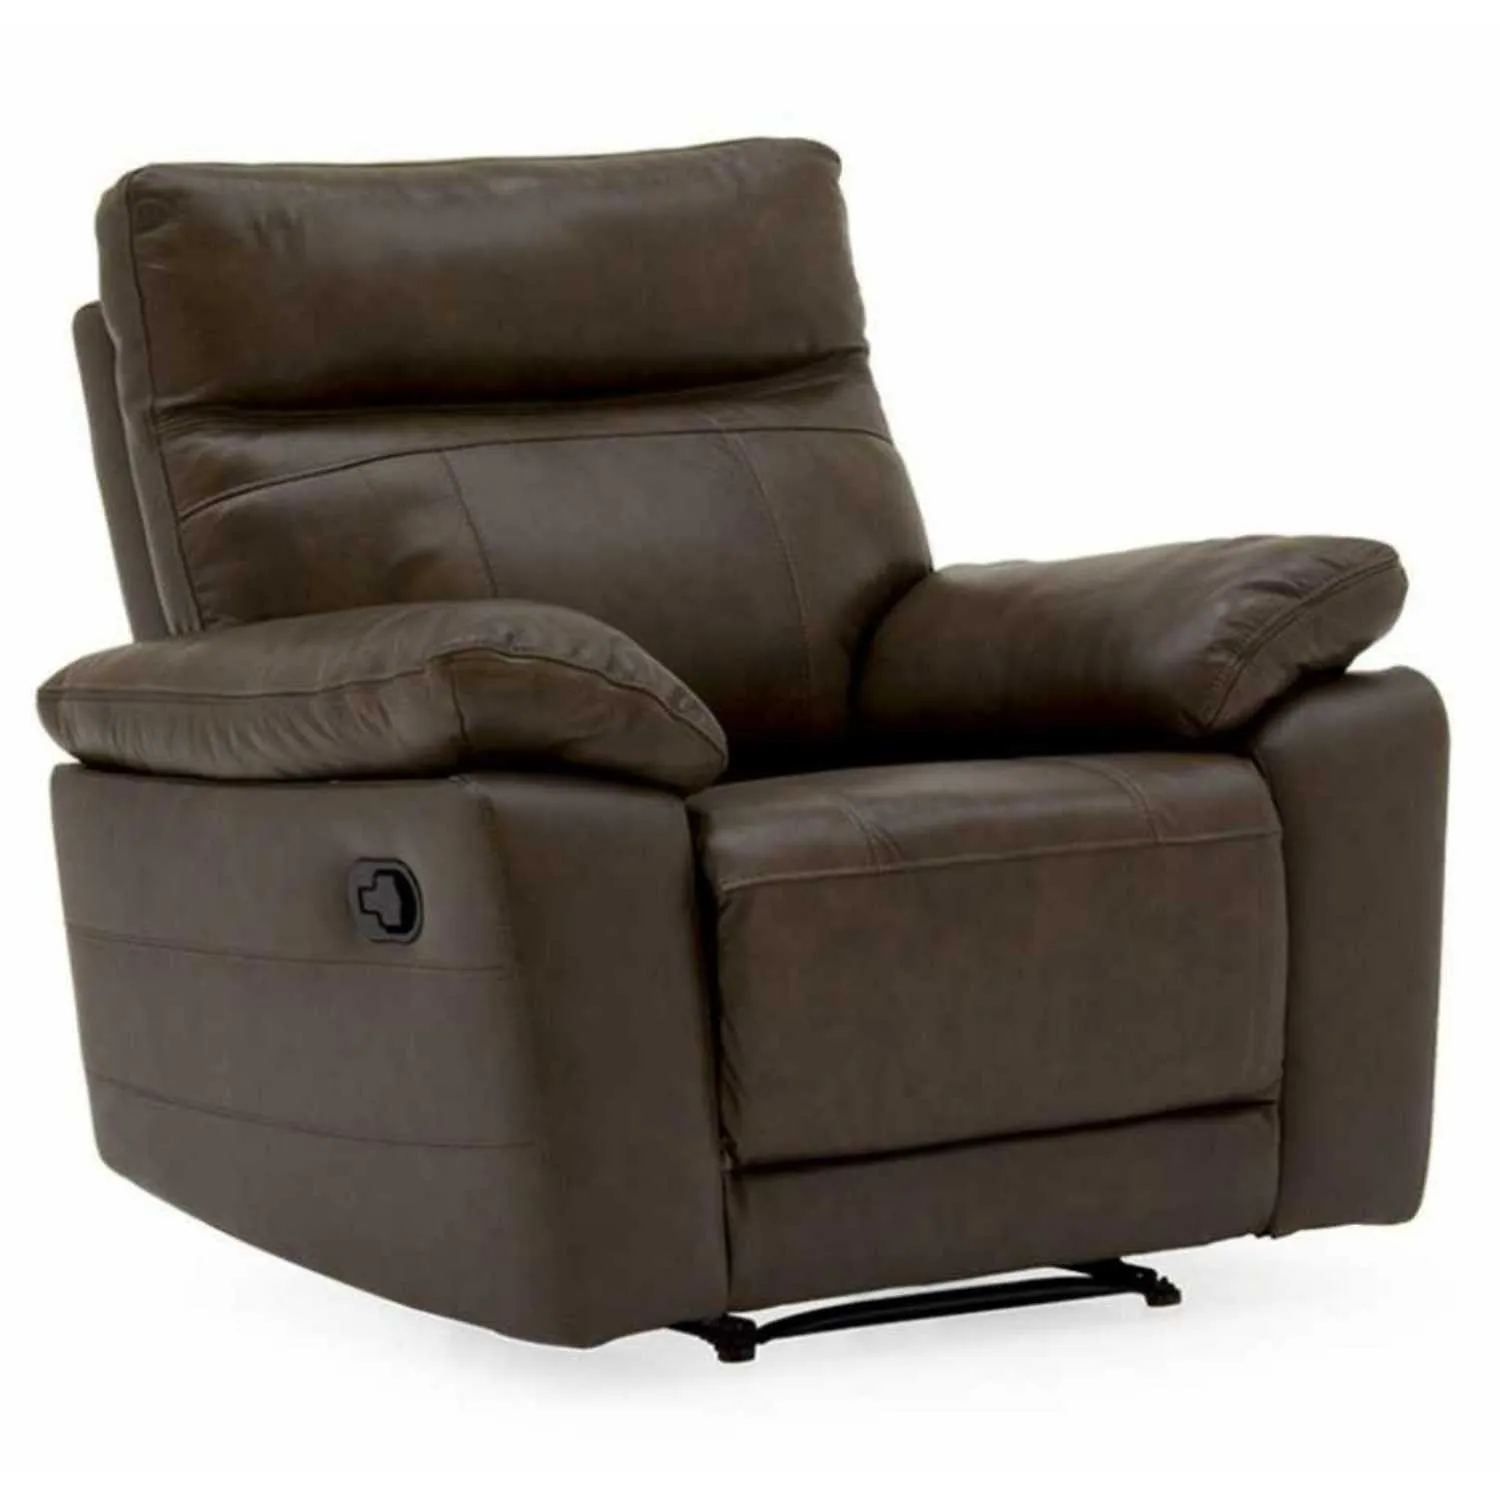 Modern Brown Leather Upholstery Comfy 1 Seater Recliner Armchair